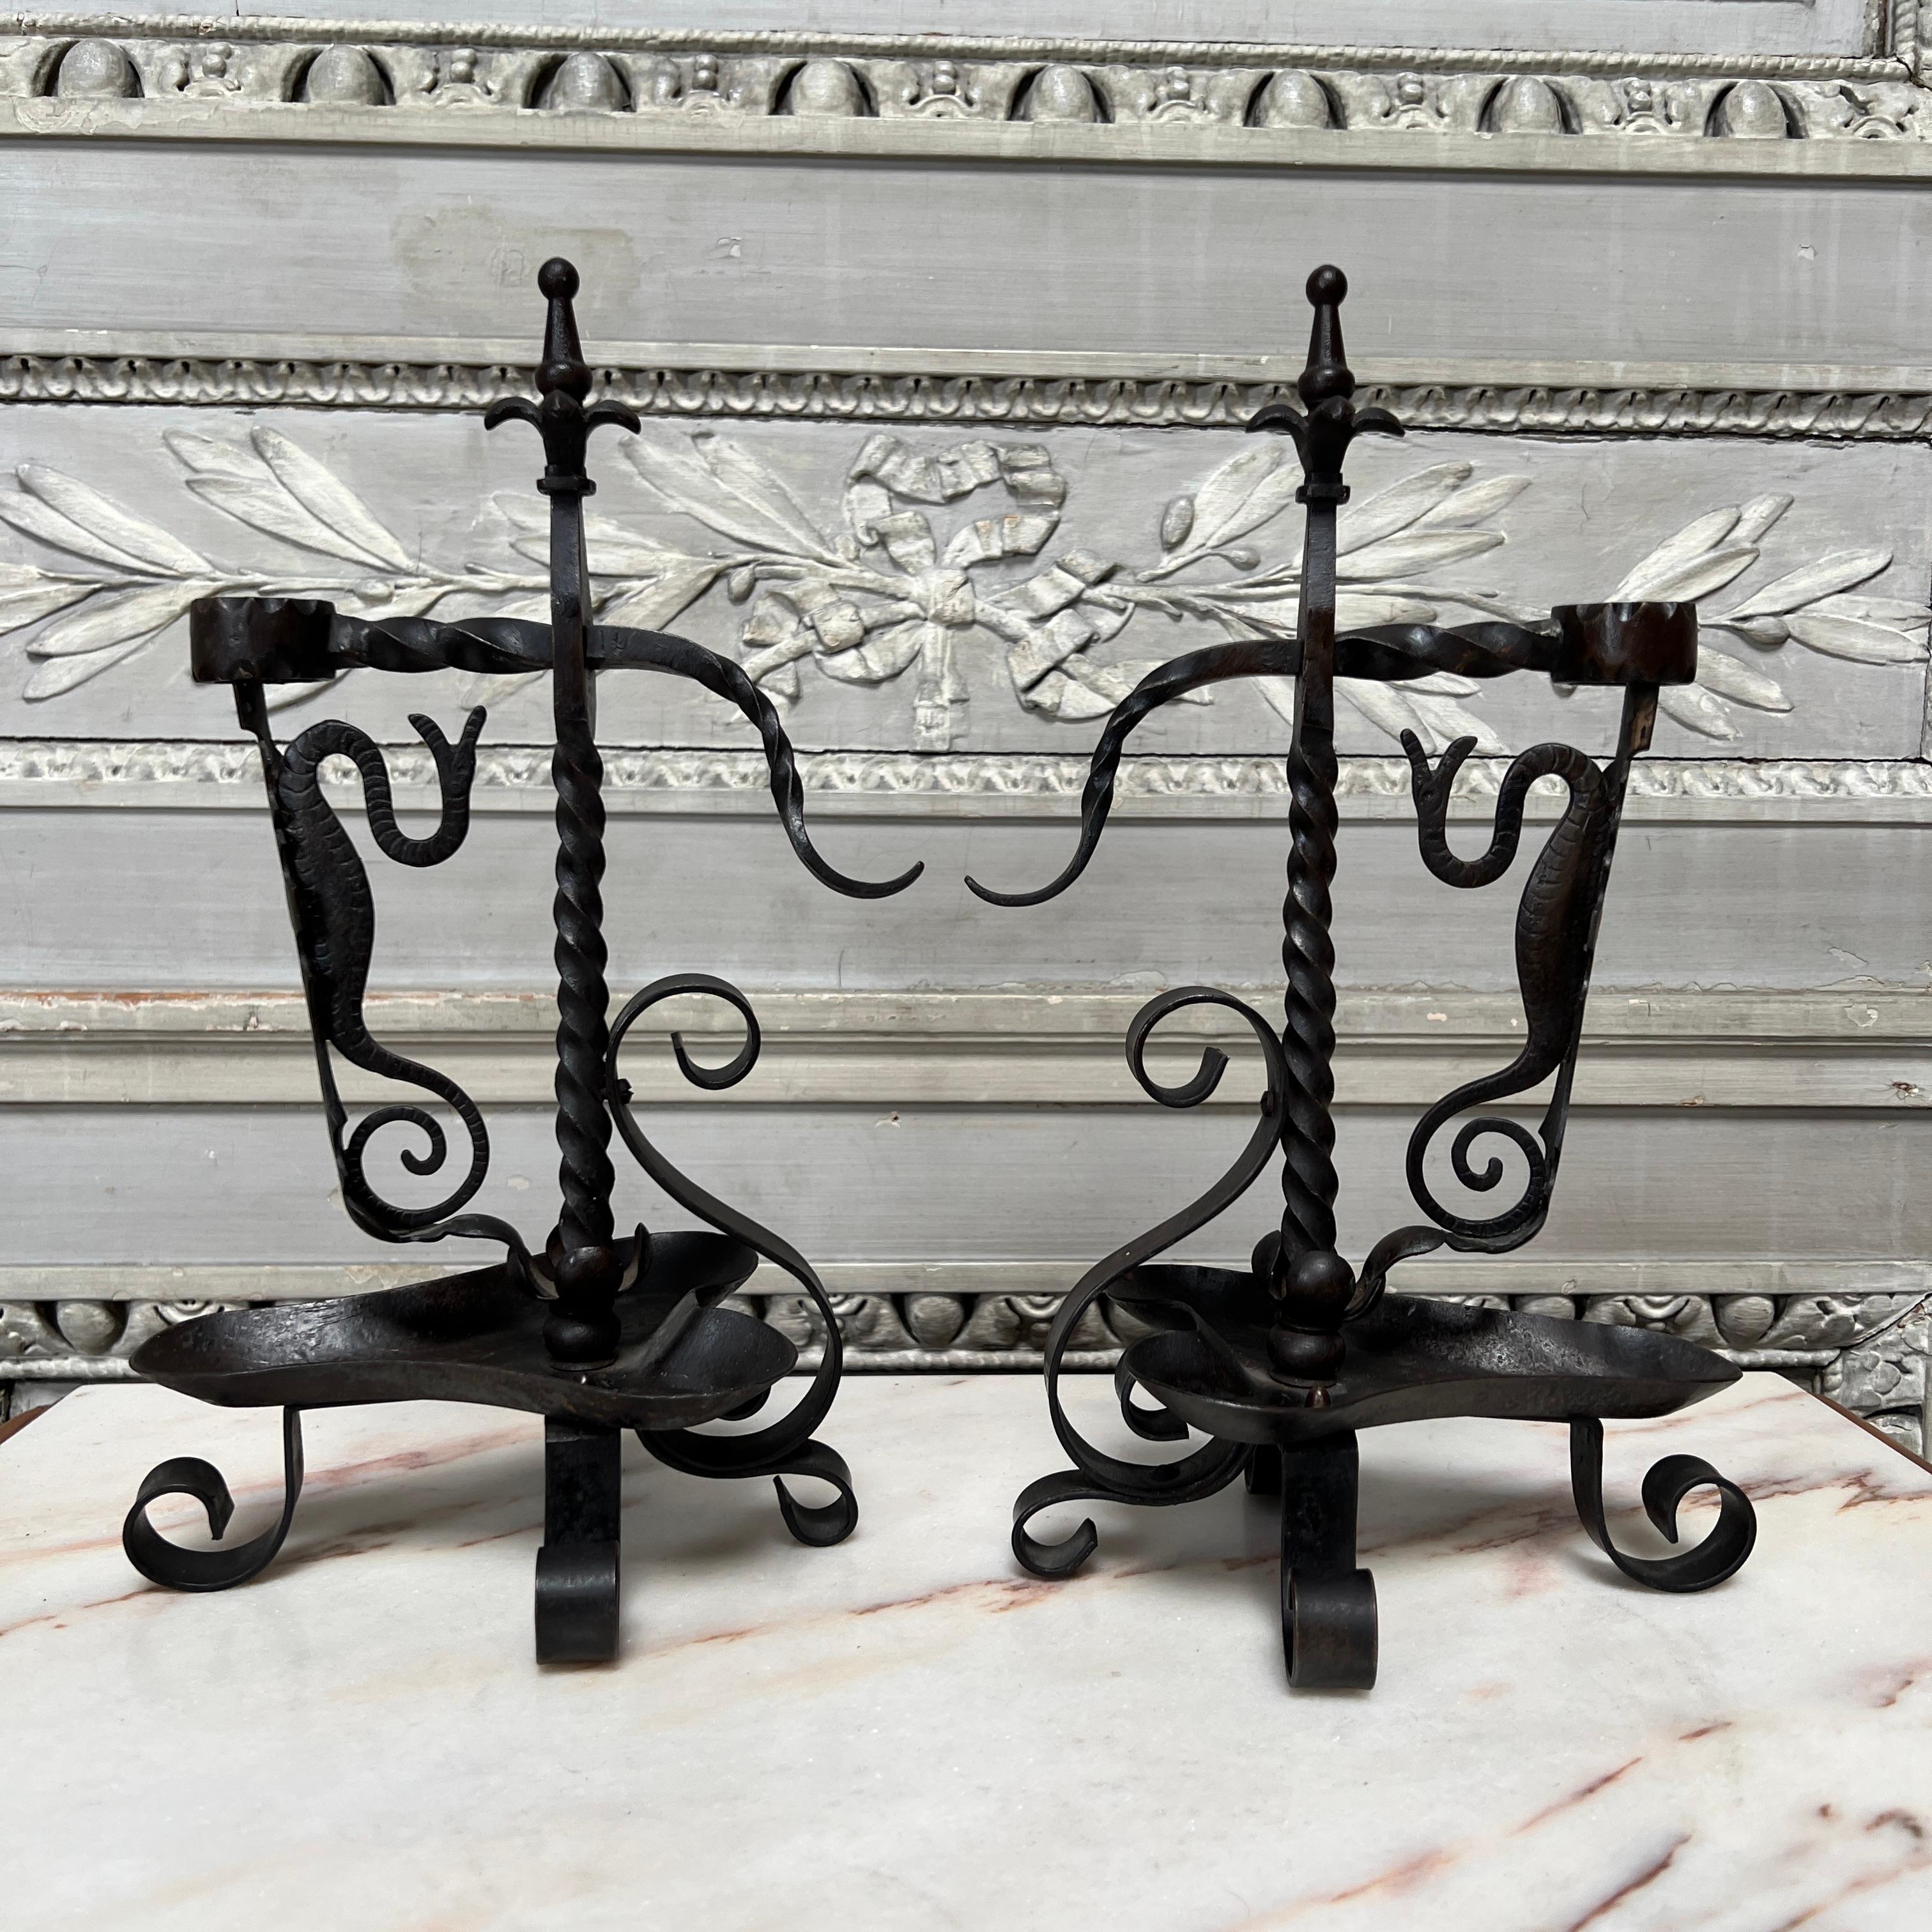 A pair of forged iron candlesticks candle holders with a handle in the form of a sea creature and a movable clamp to keep your candle in place and secure. These unusual candle holders are nicely made and highly decorative.